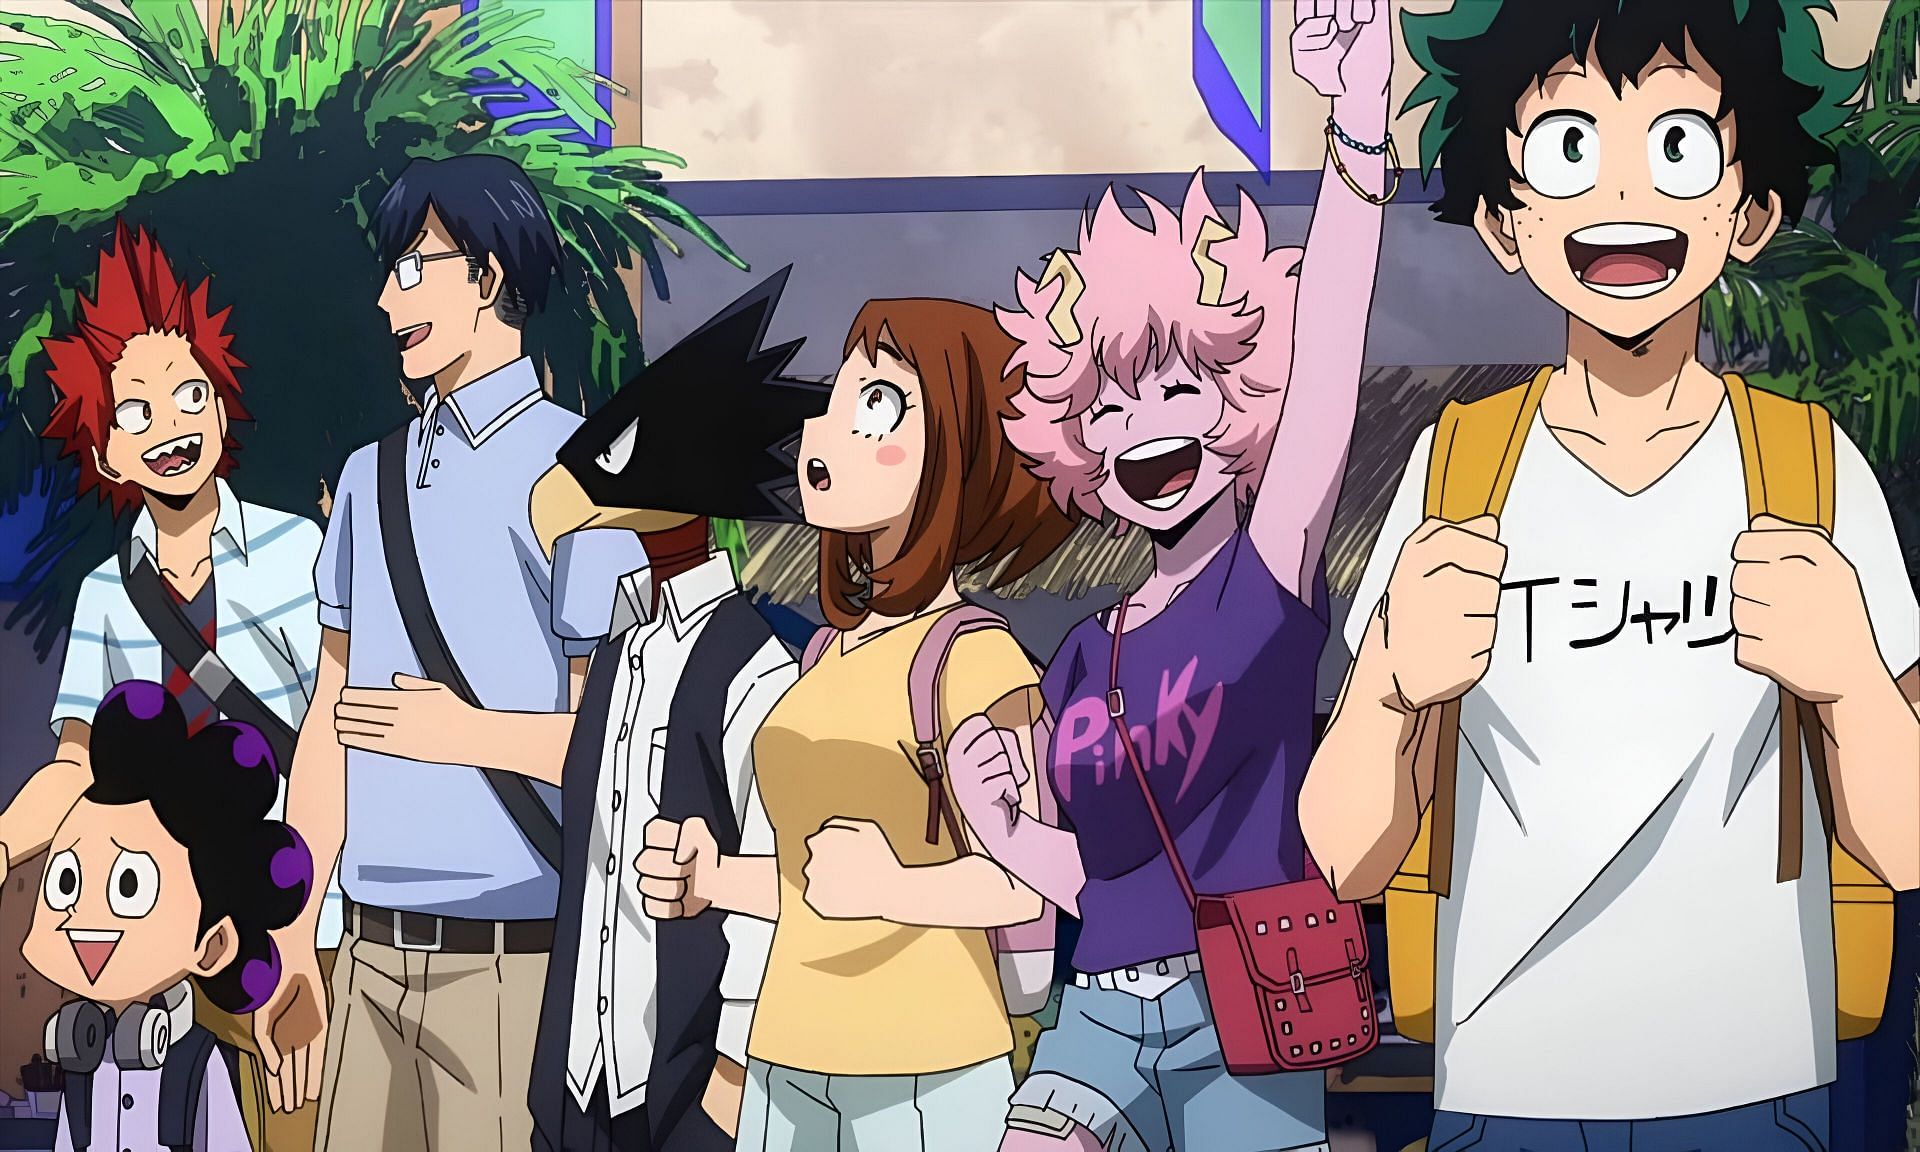 Some students of Class 1-A (Image via Bones)